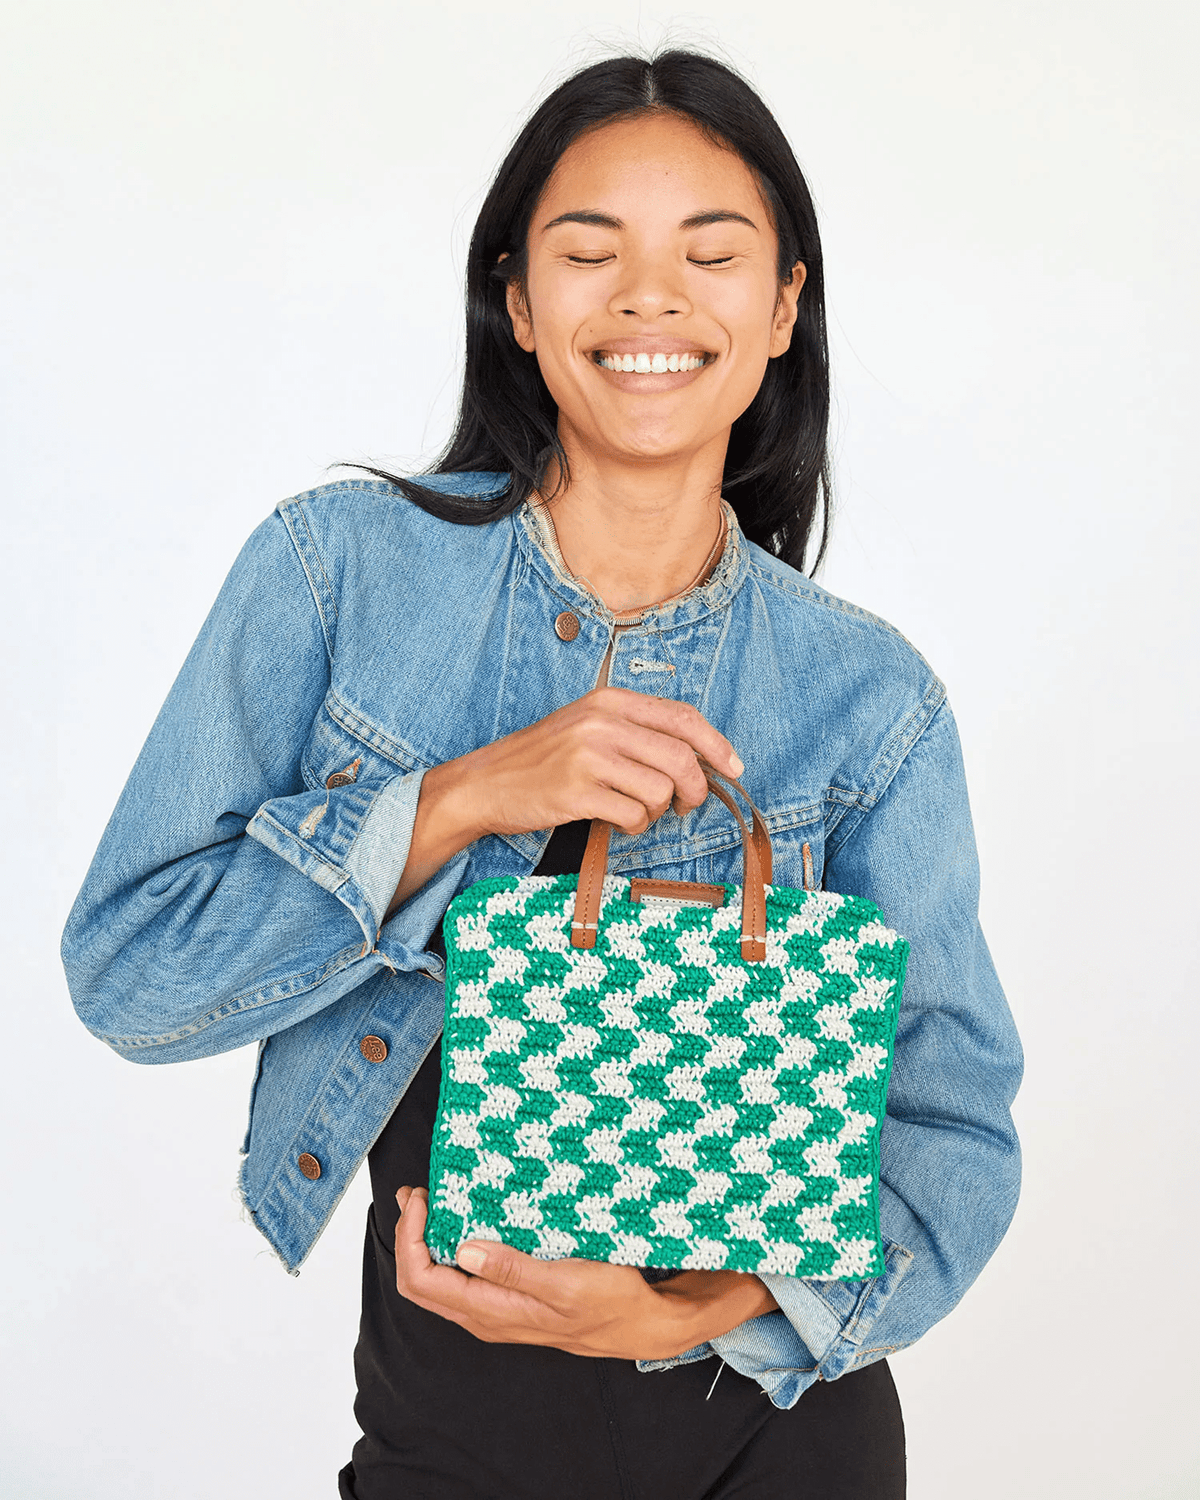 Petit Summer Simple Tote in Sea Green & Cream Crochet Checker Clare V. :  Find the Inspiration within Every Detail